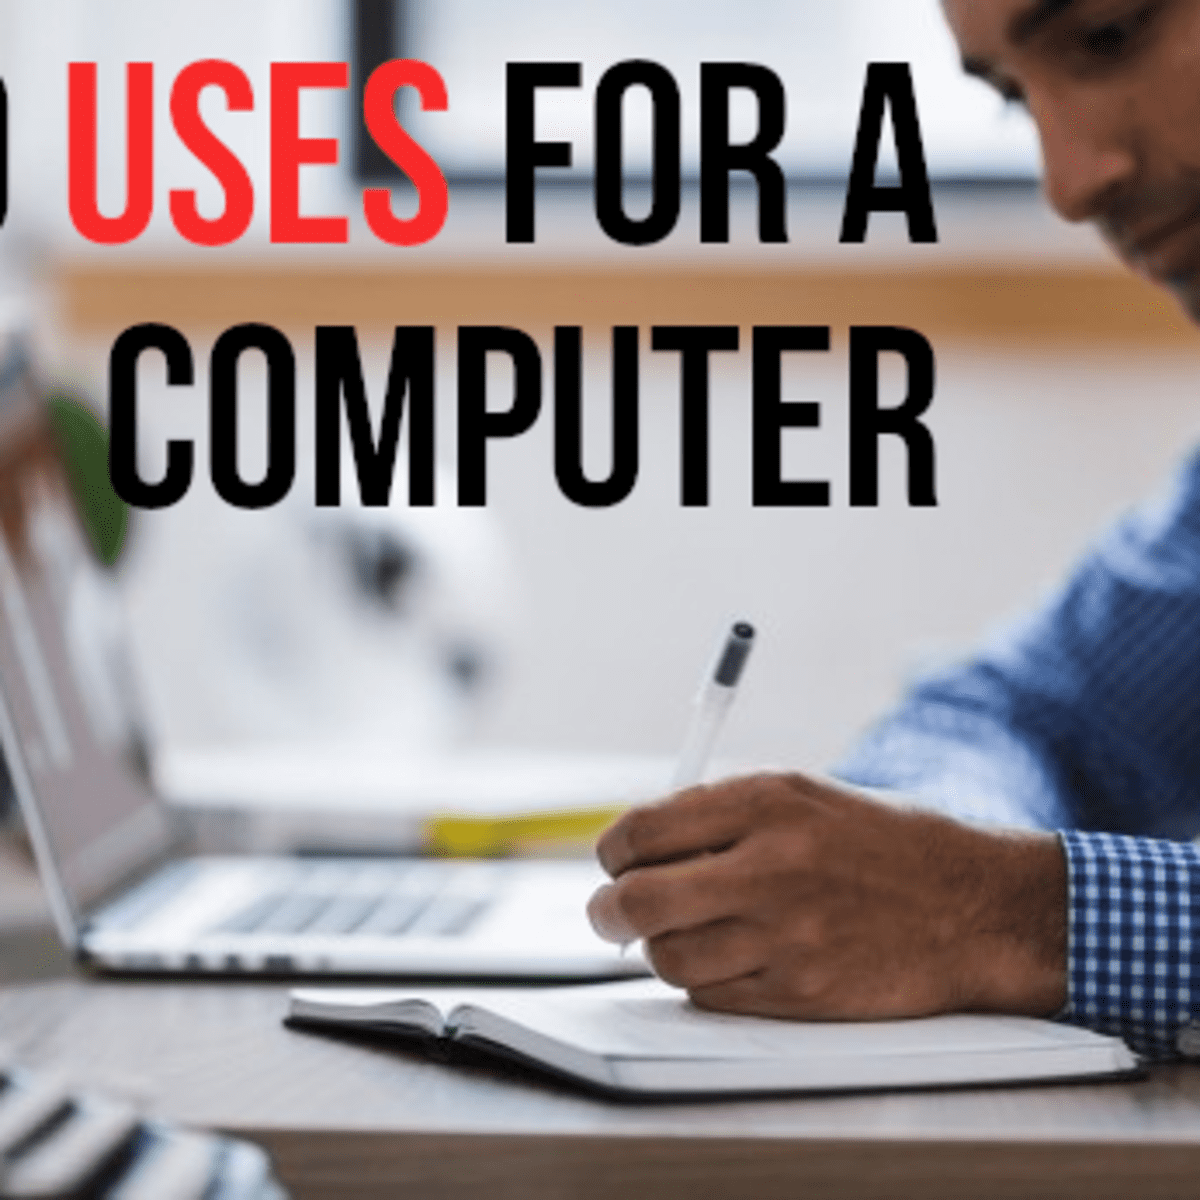 how do computers help us in everyday life